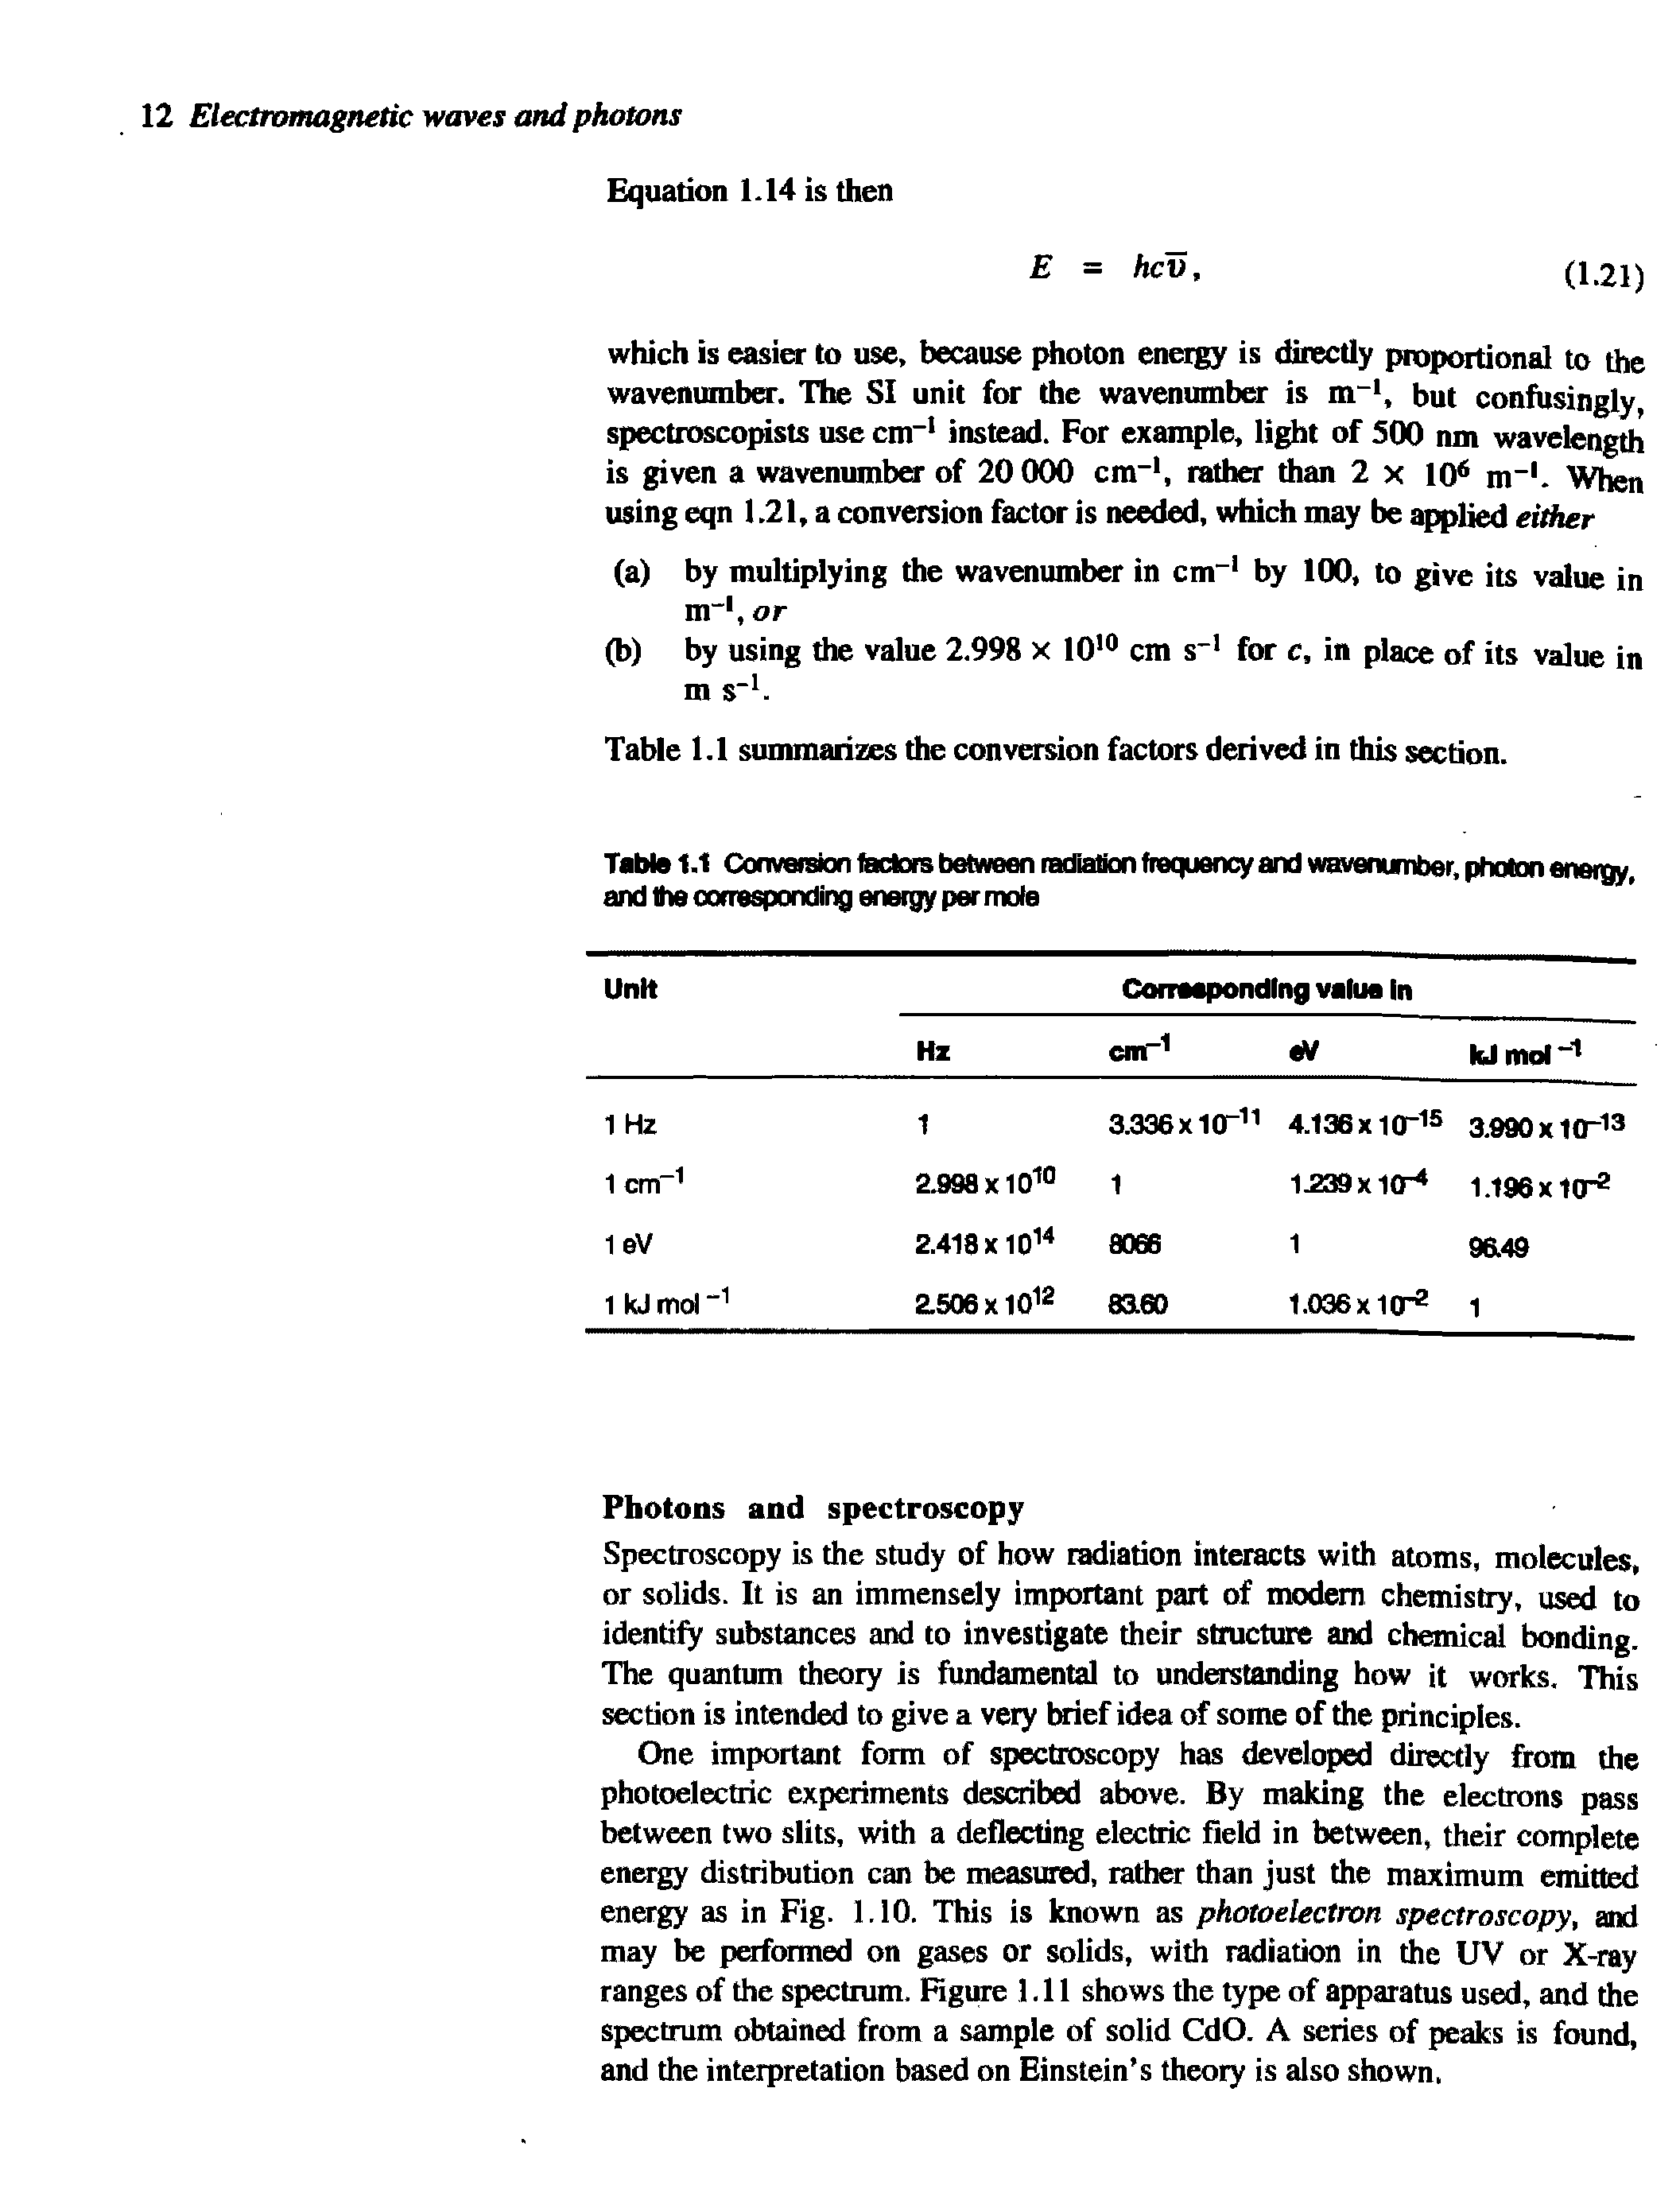 Table 1.1 Conversion factors between radiation frequency and wavenumber, photon energy, and the corresponding energy per moie...